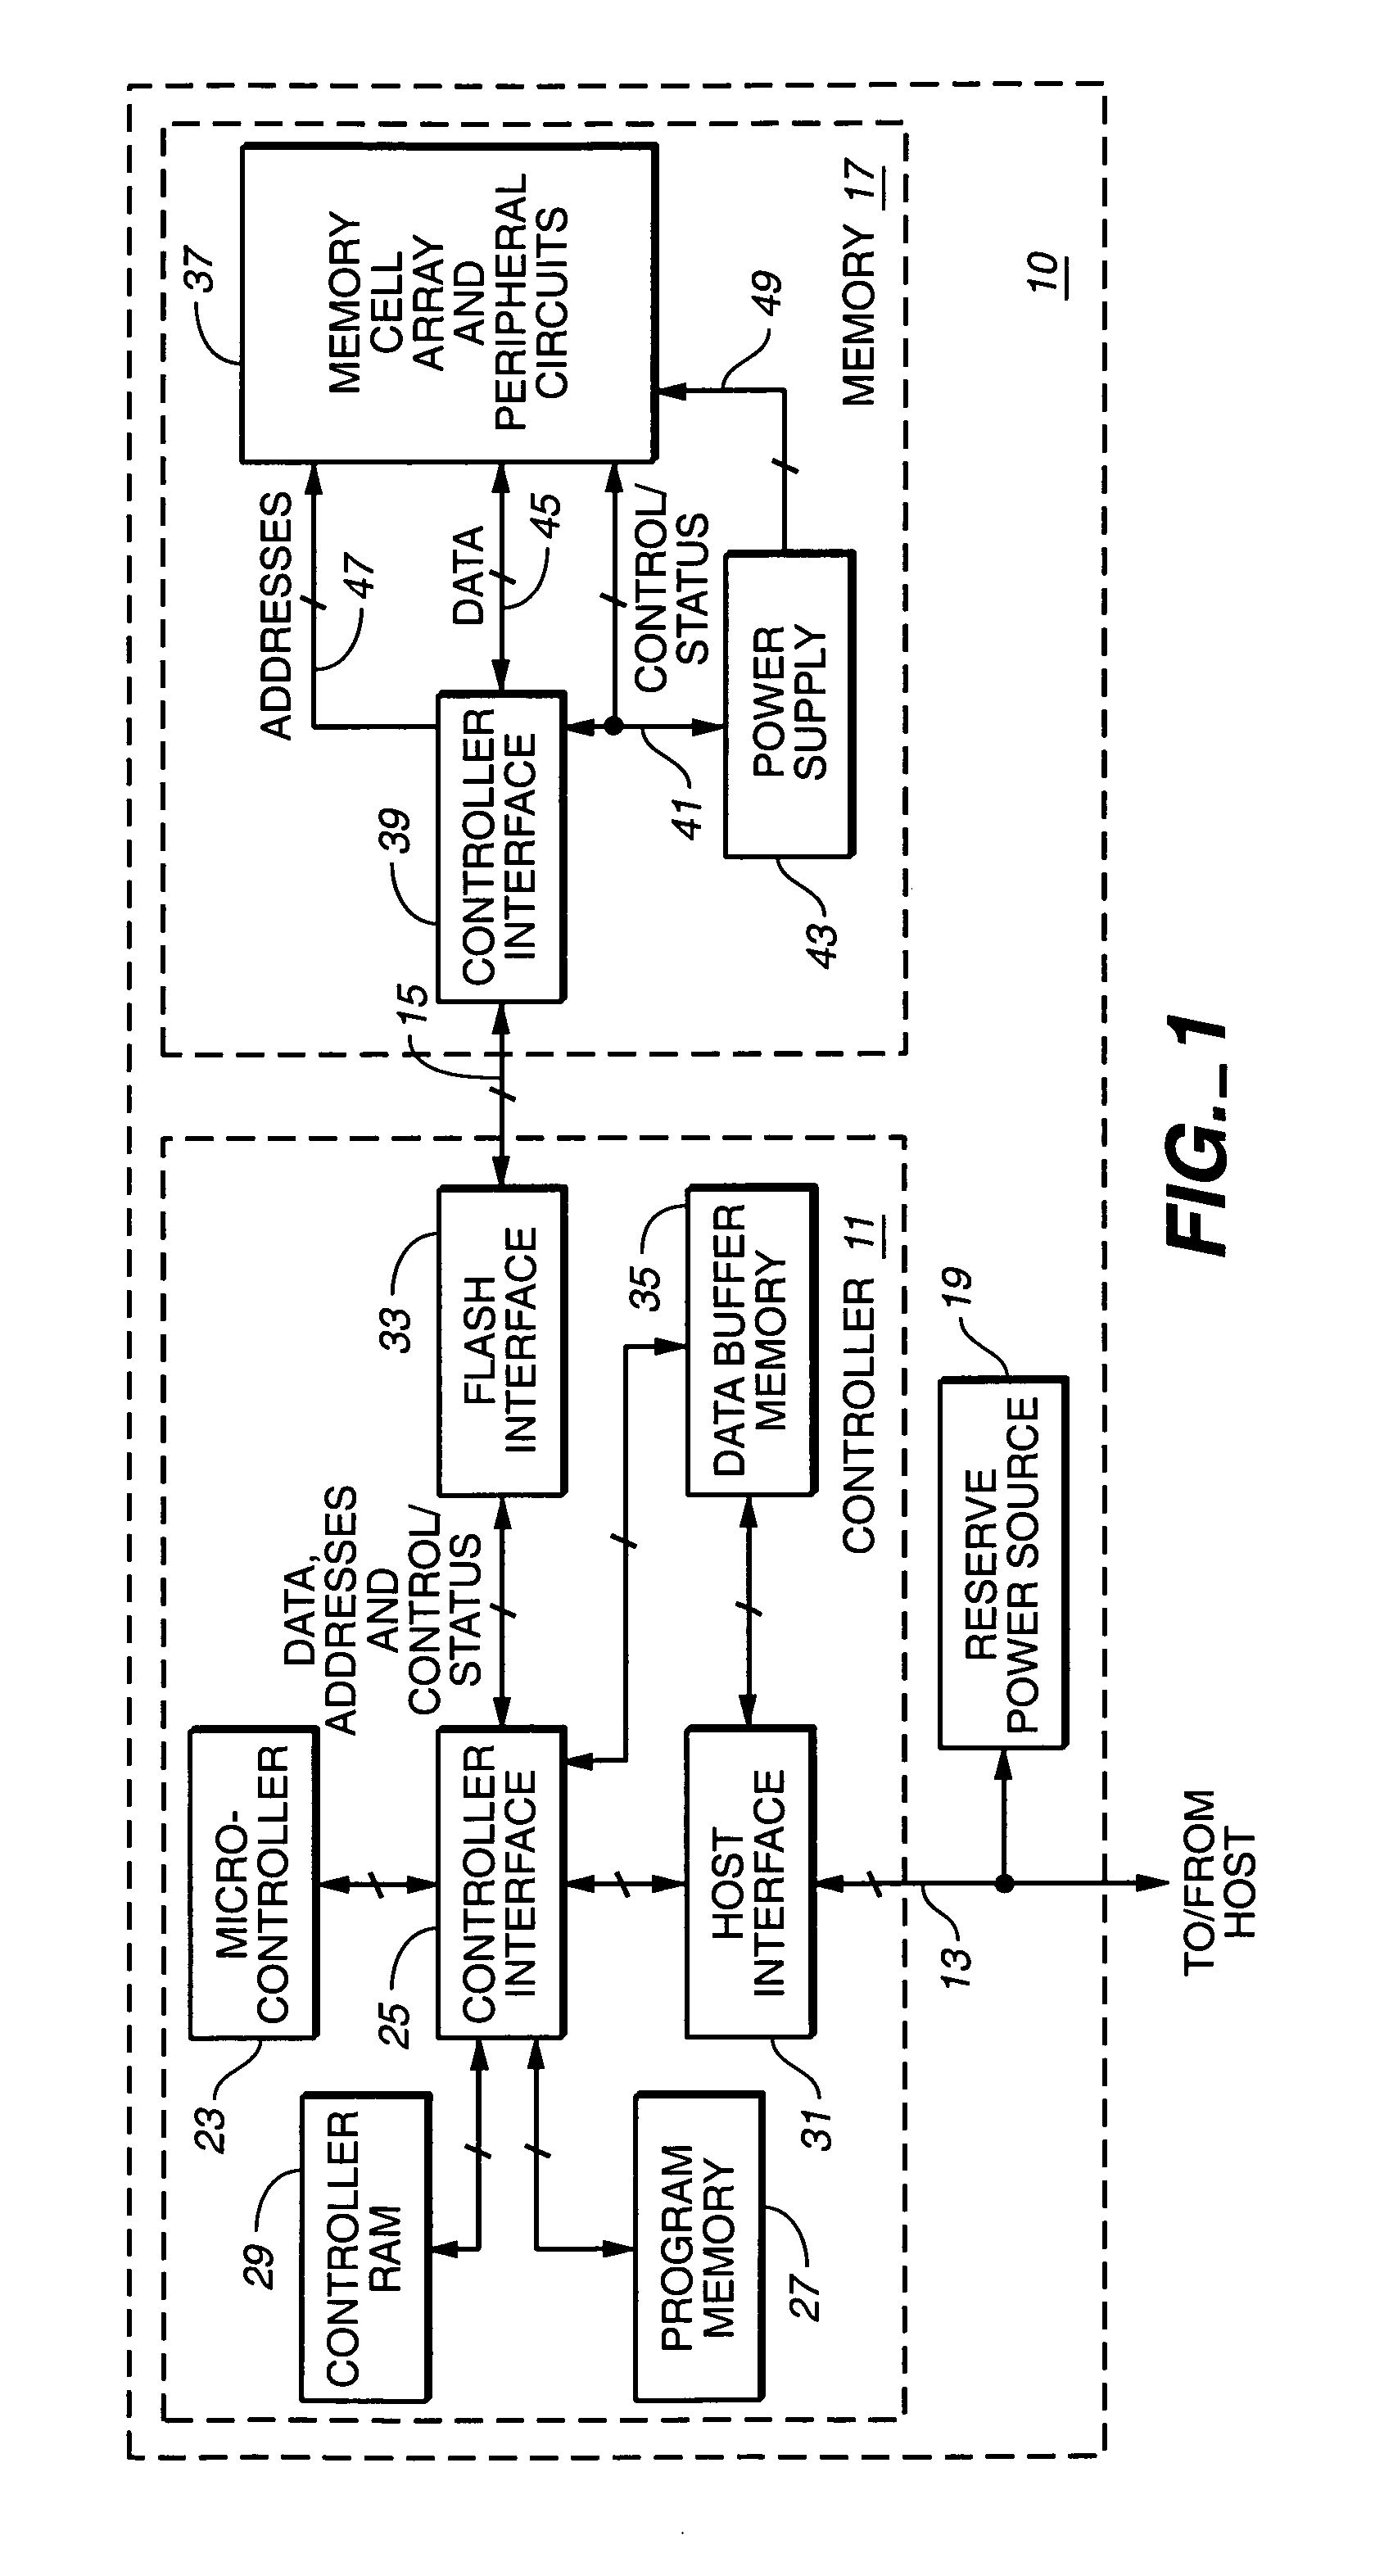 Compressed event counting technique and application to a flash memory system